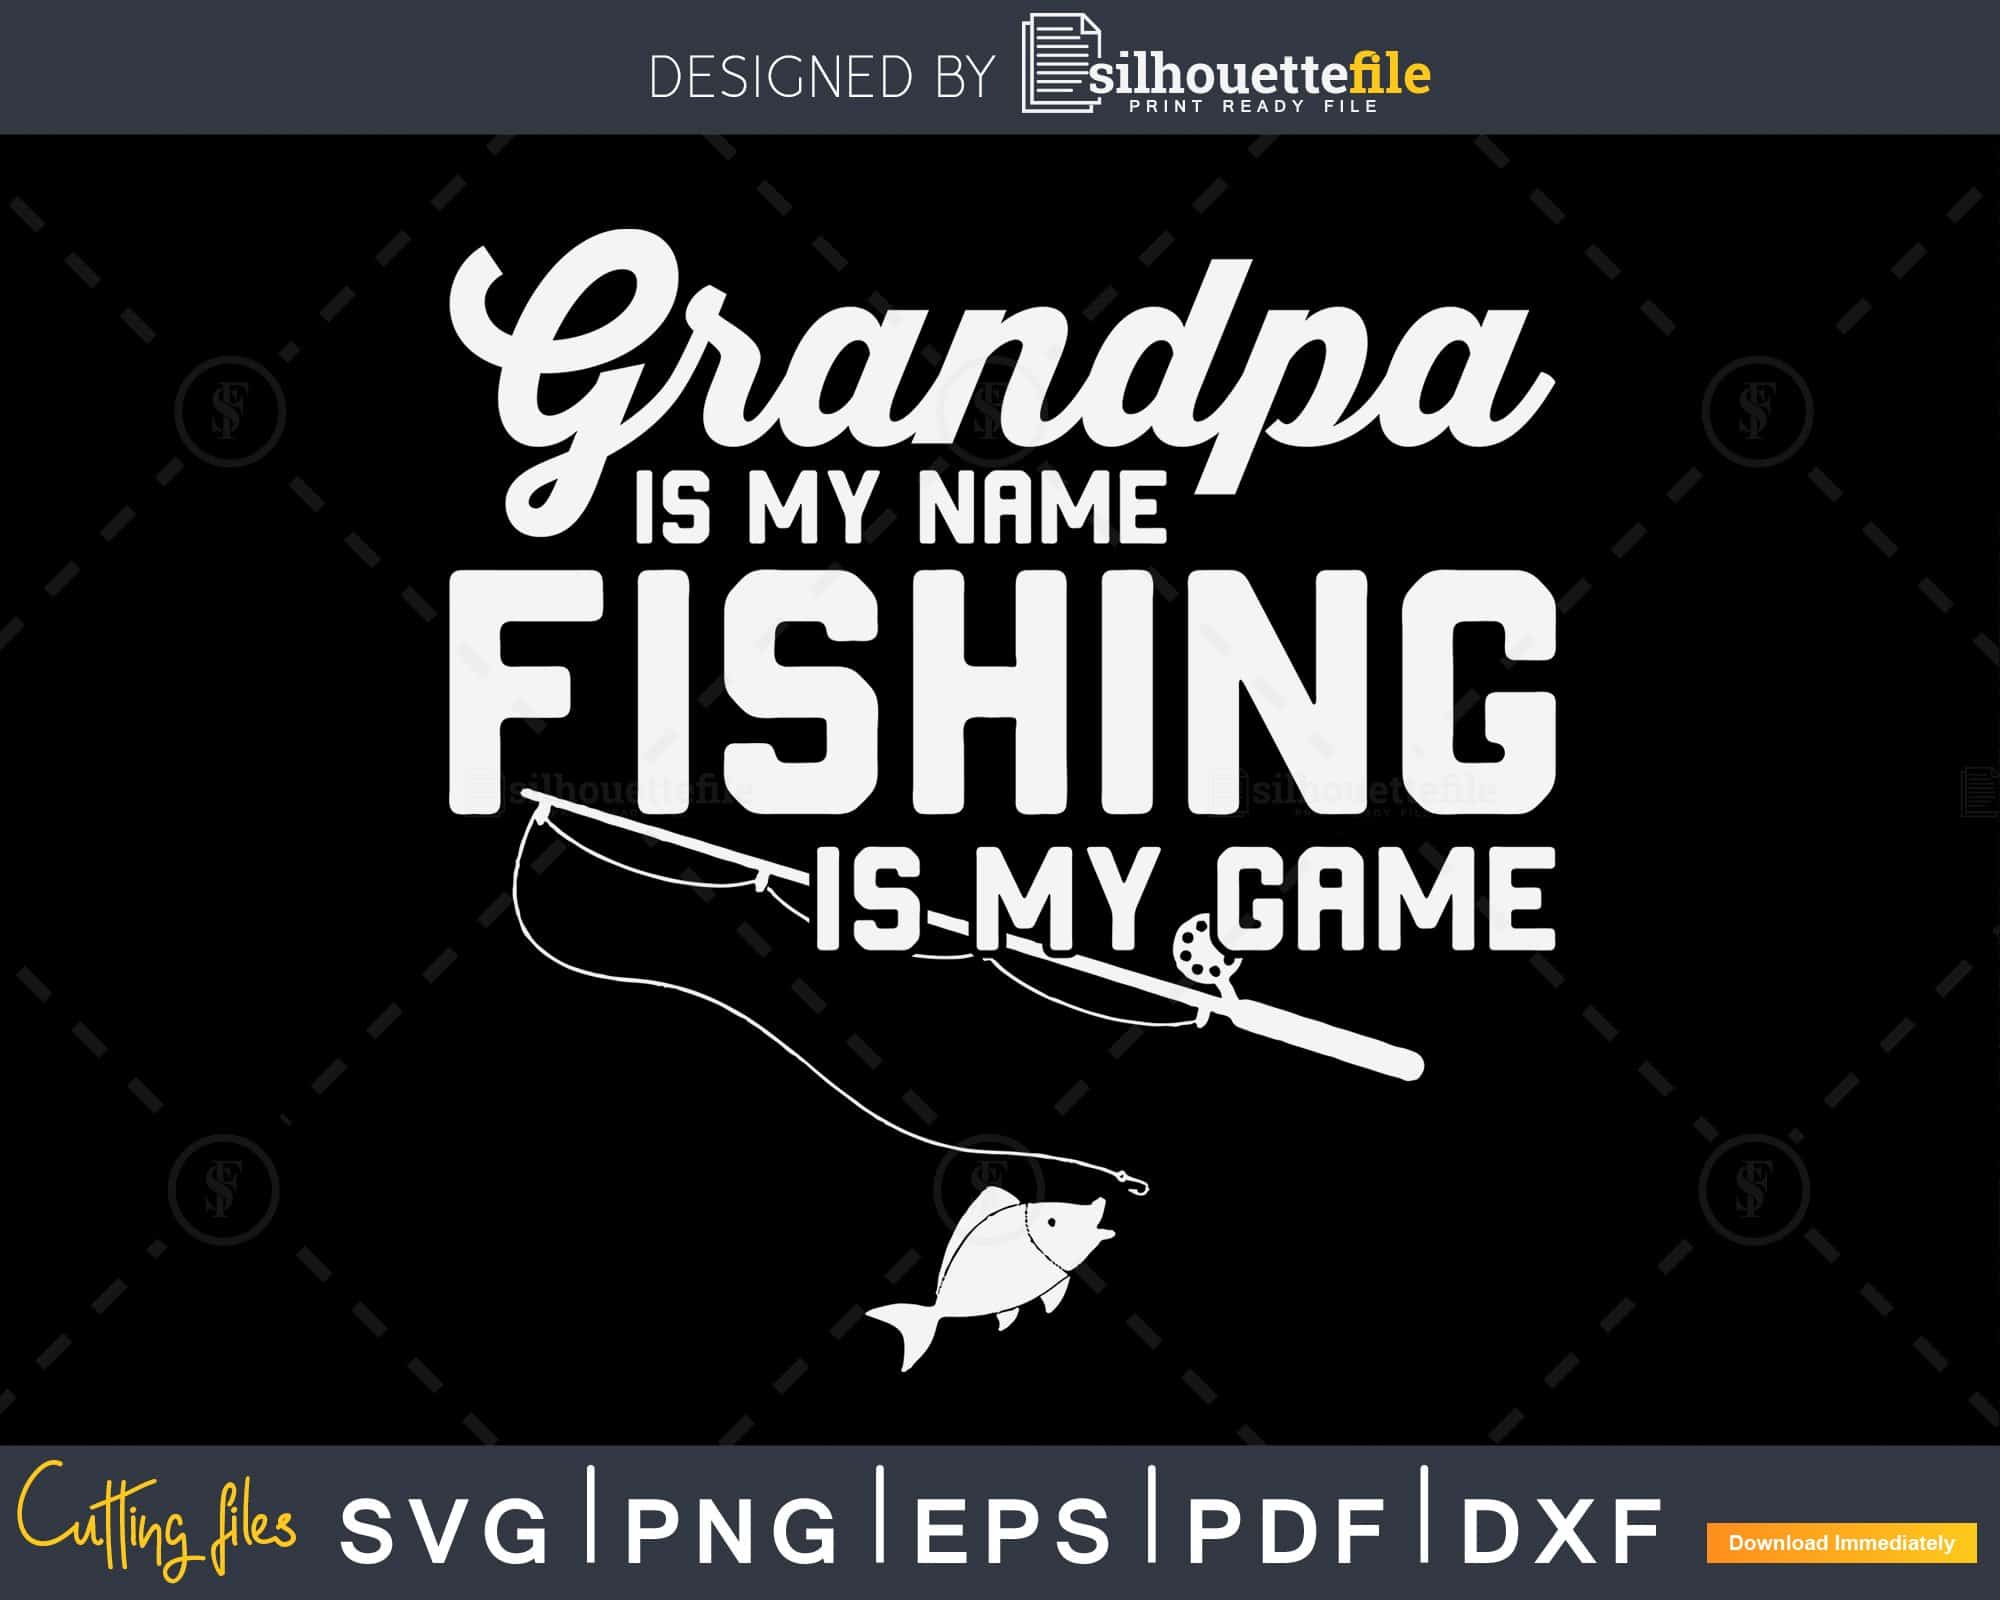 Grandpa is My Name Fishing is My Game svg design printable cut files